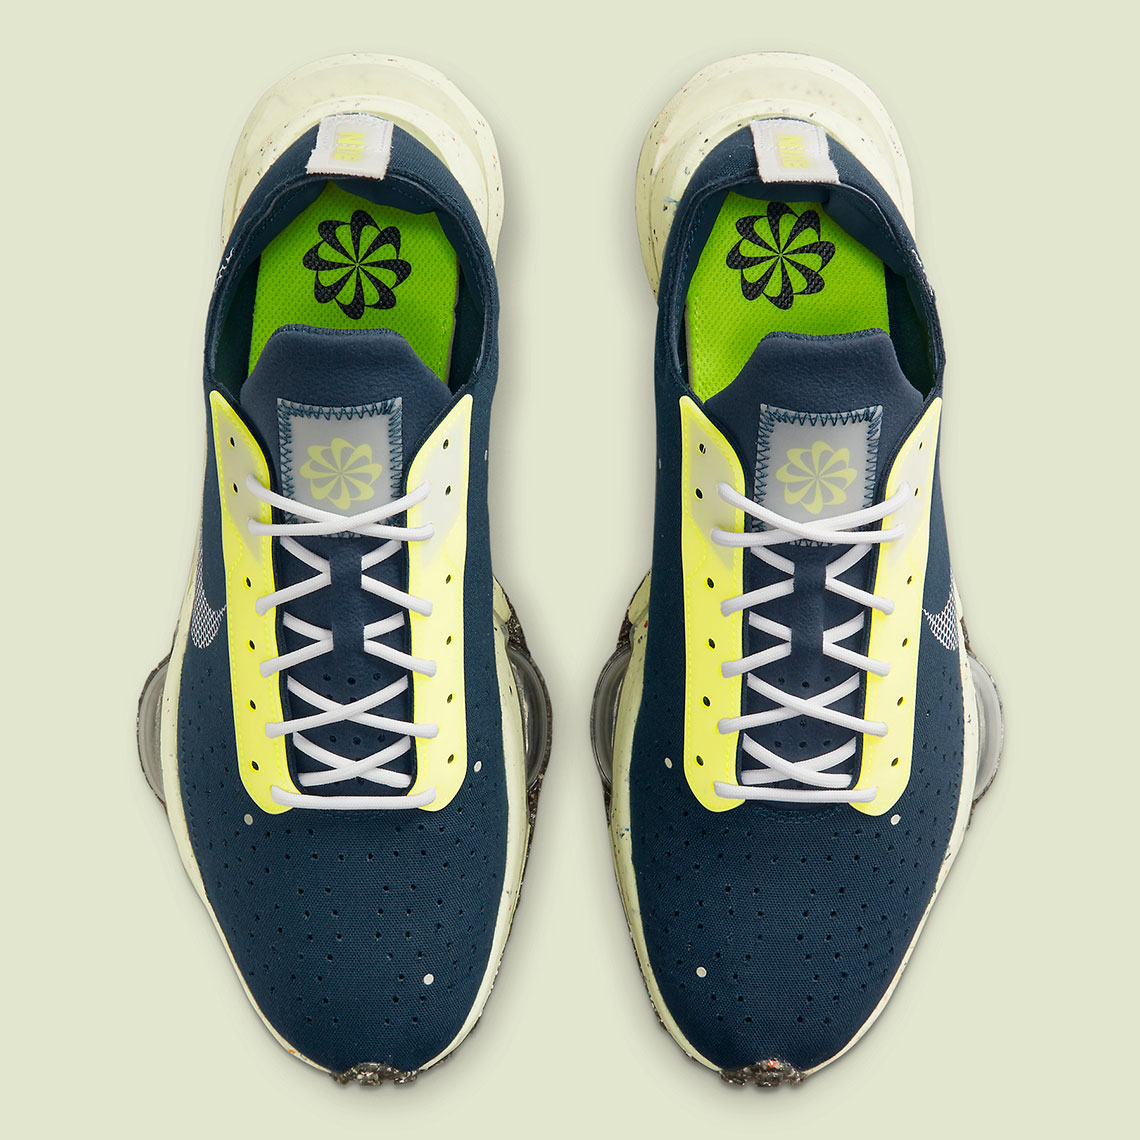 Nike Air Zoom Type Crater Navy Yellow Dh9628 400 6